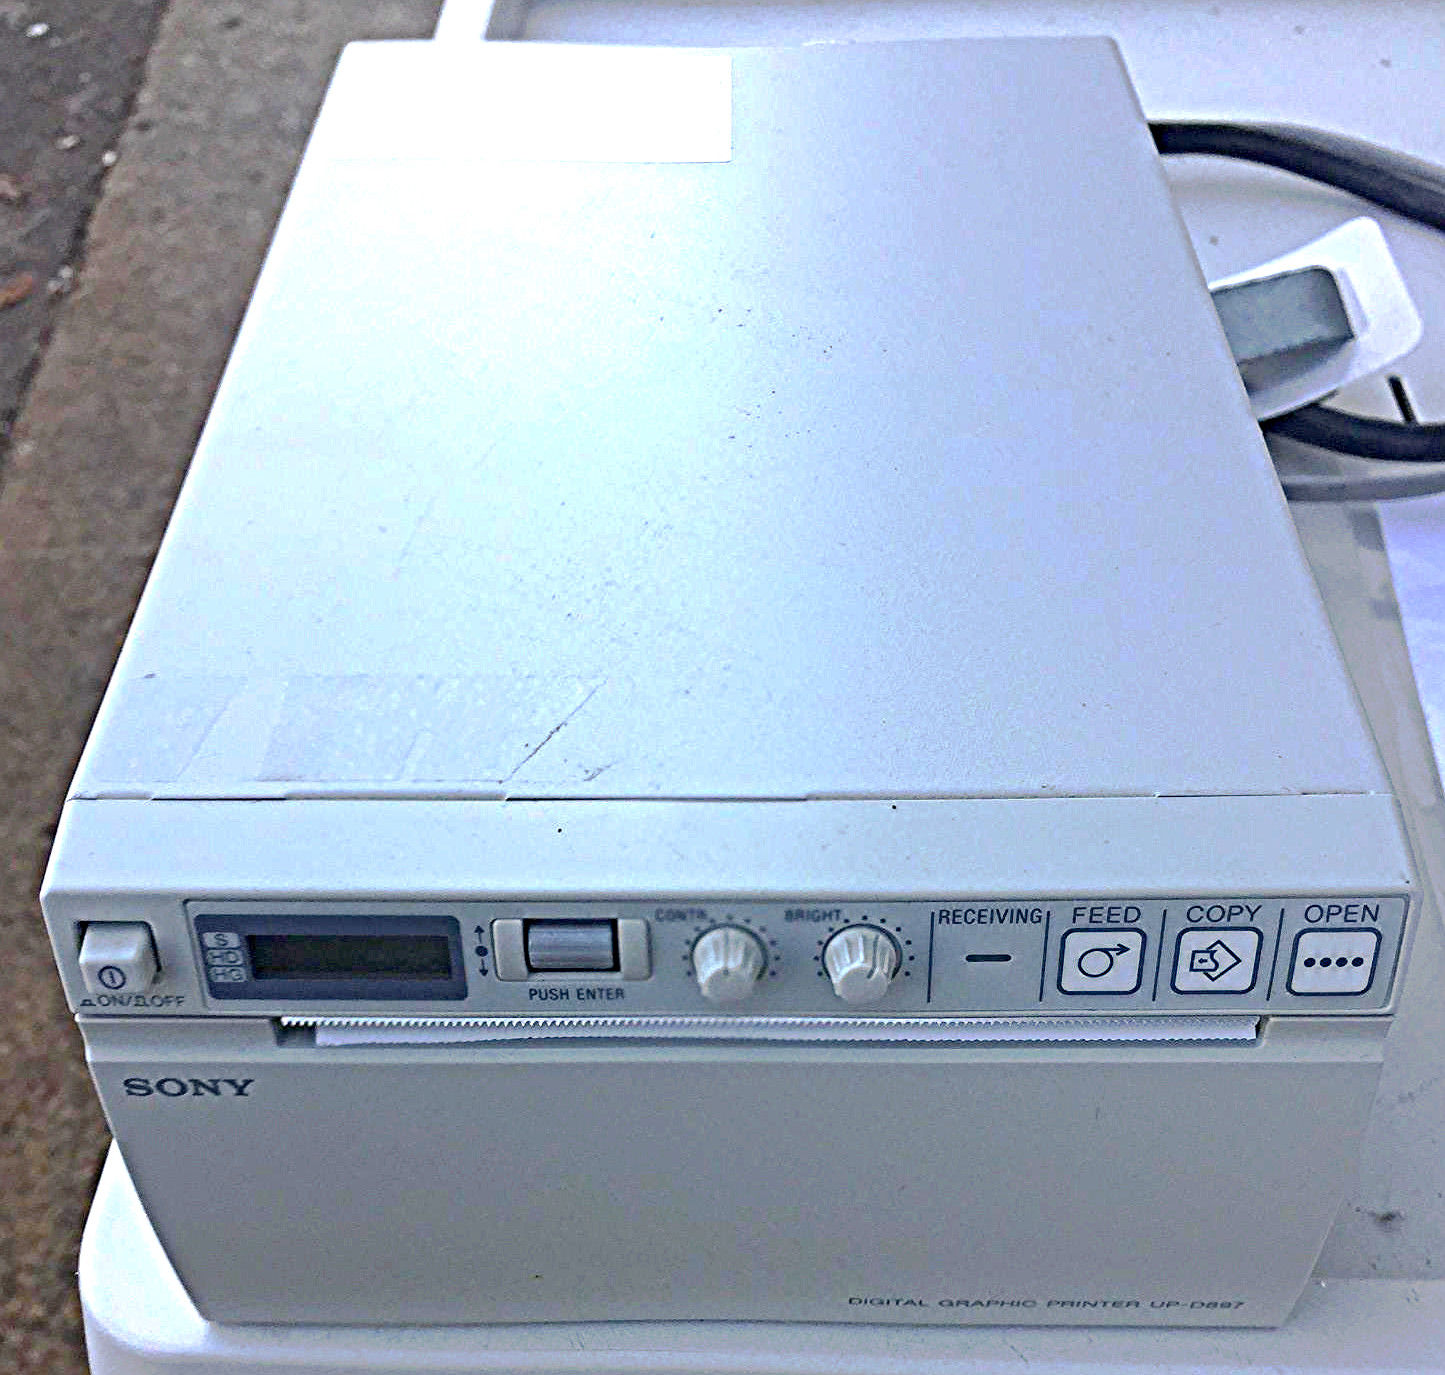 a white printer device sitting on top of a table